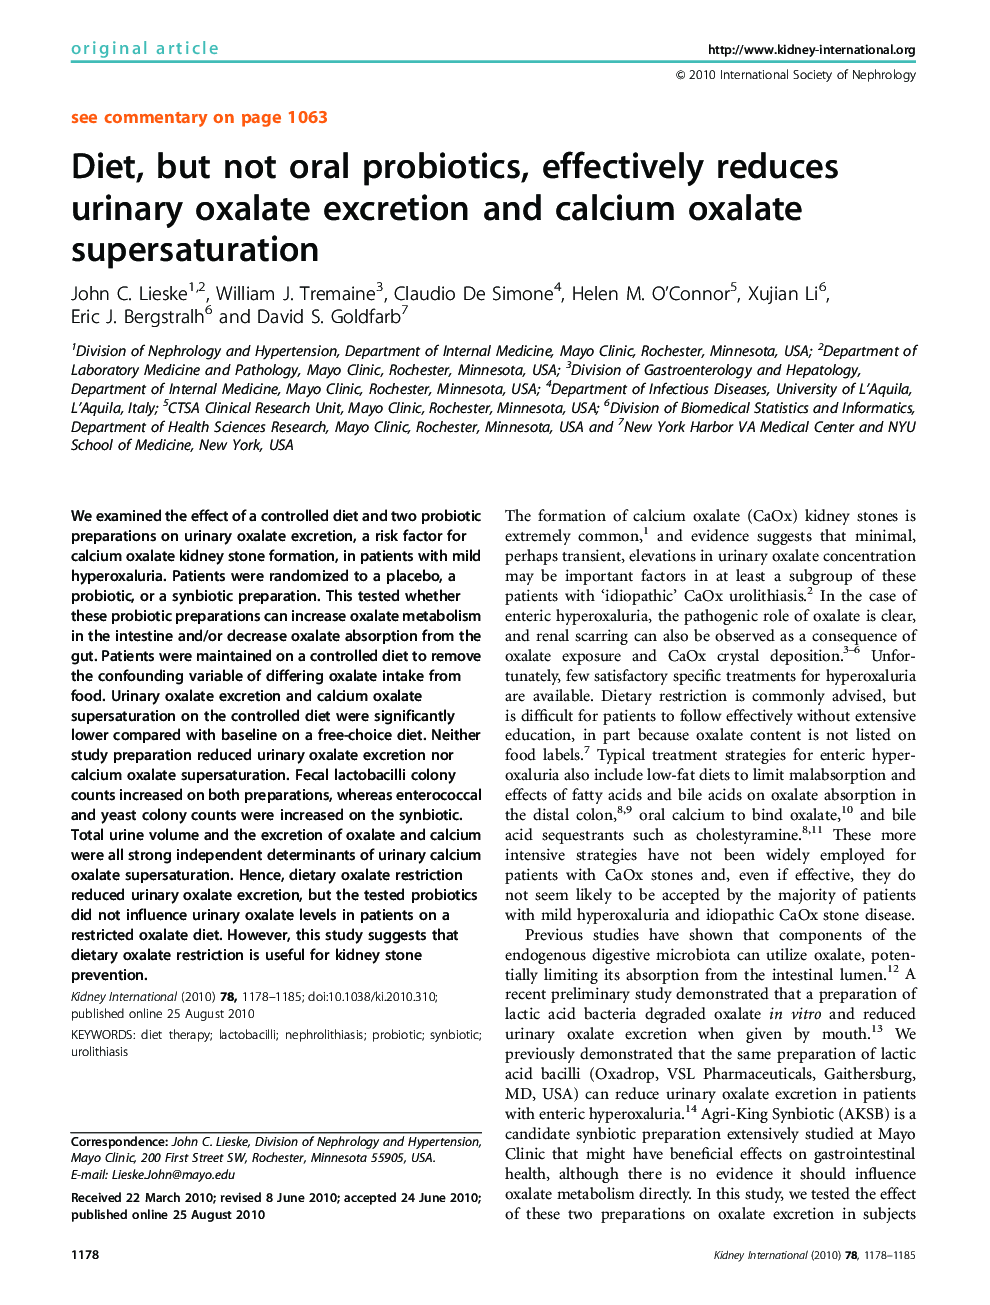 Diet, but not oral probiotics, effectively reduces urinary oxalate excretion and calcium oxalate supersaturation 